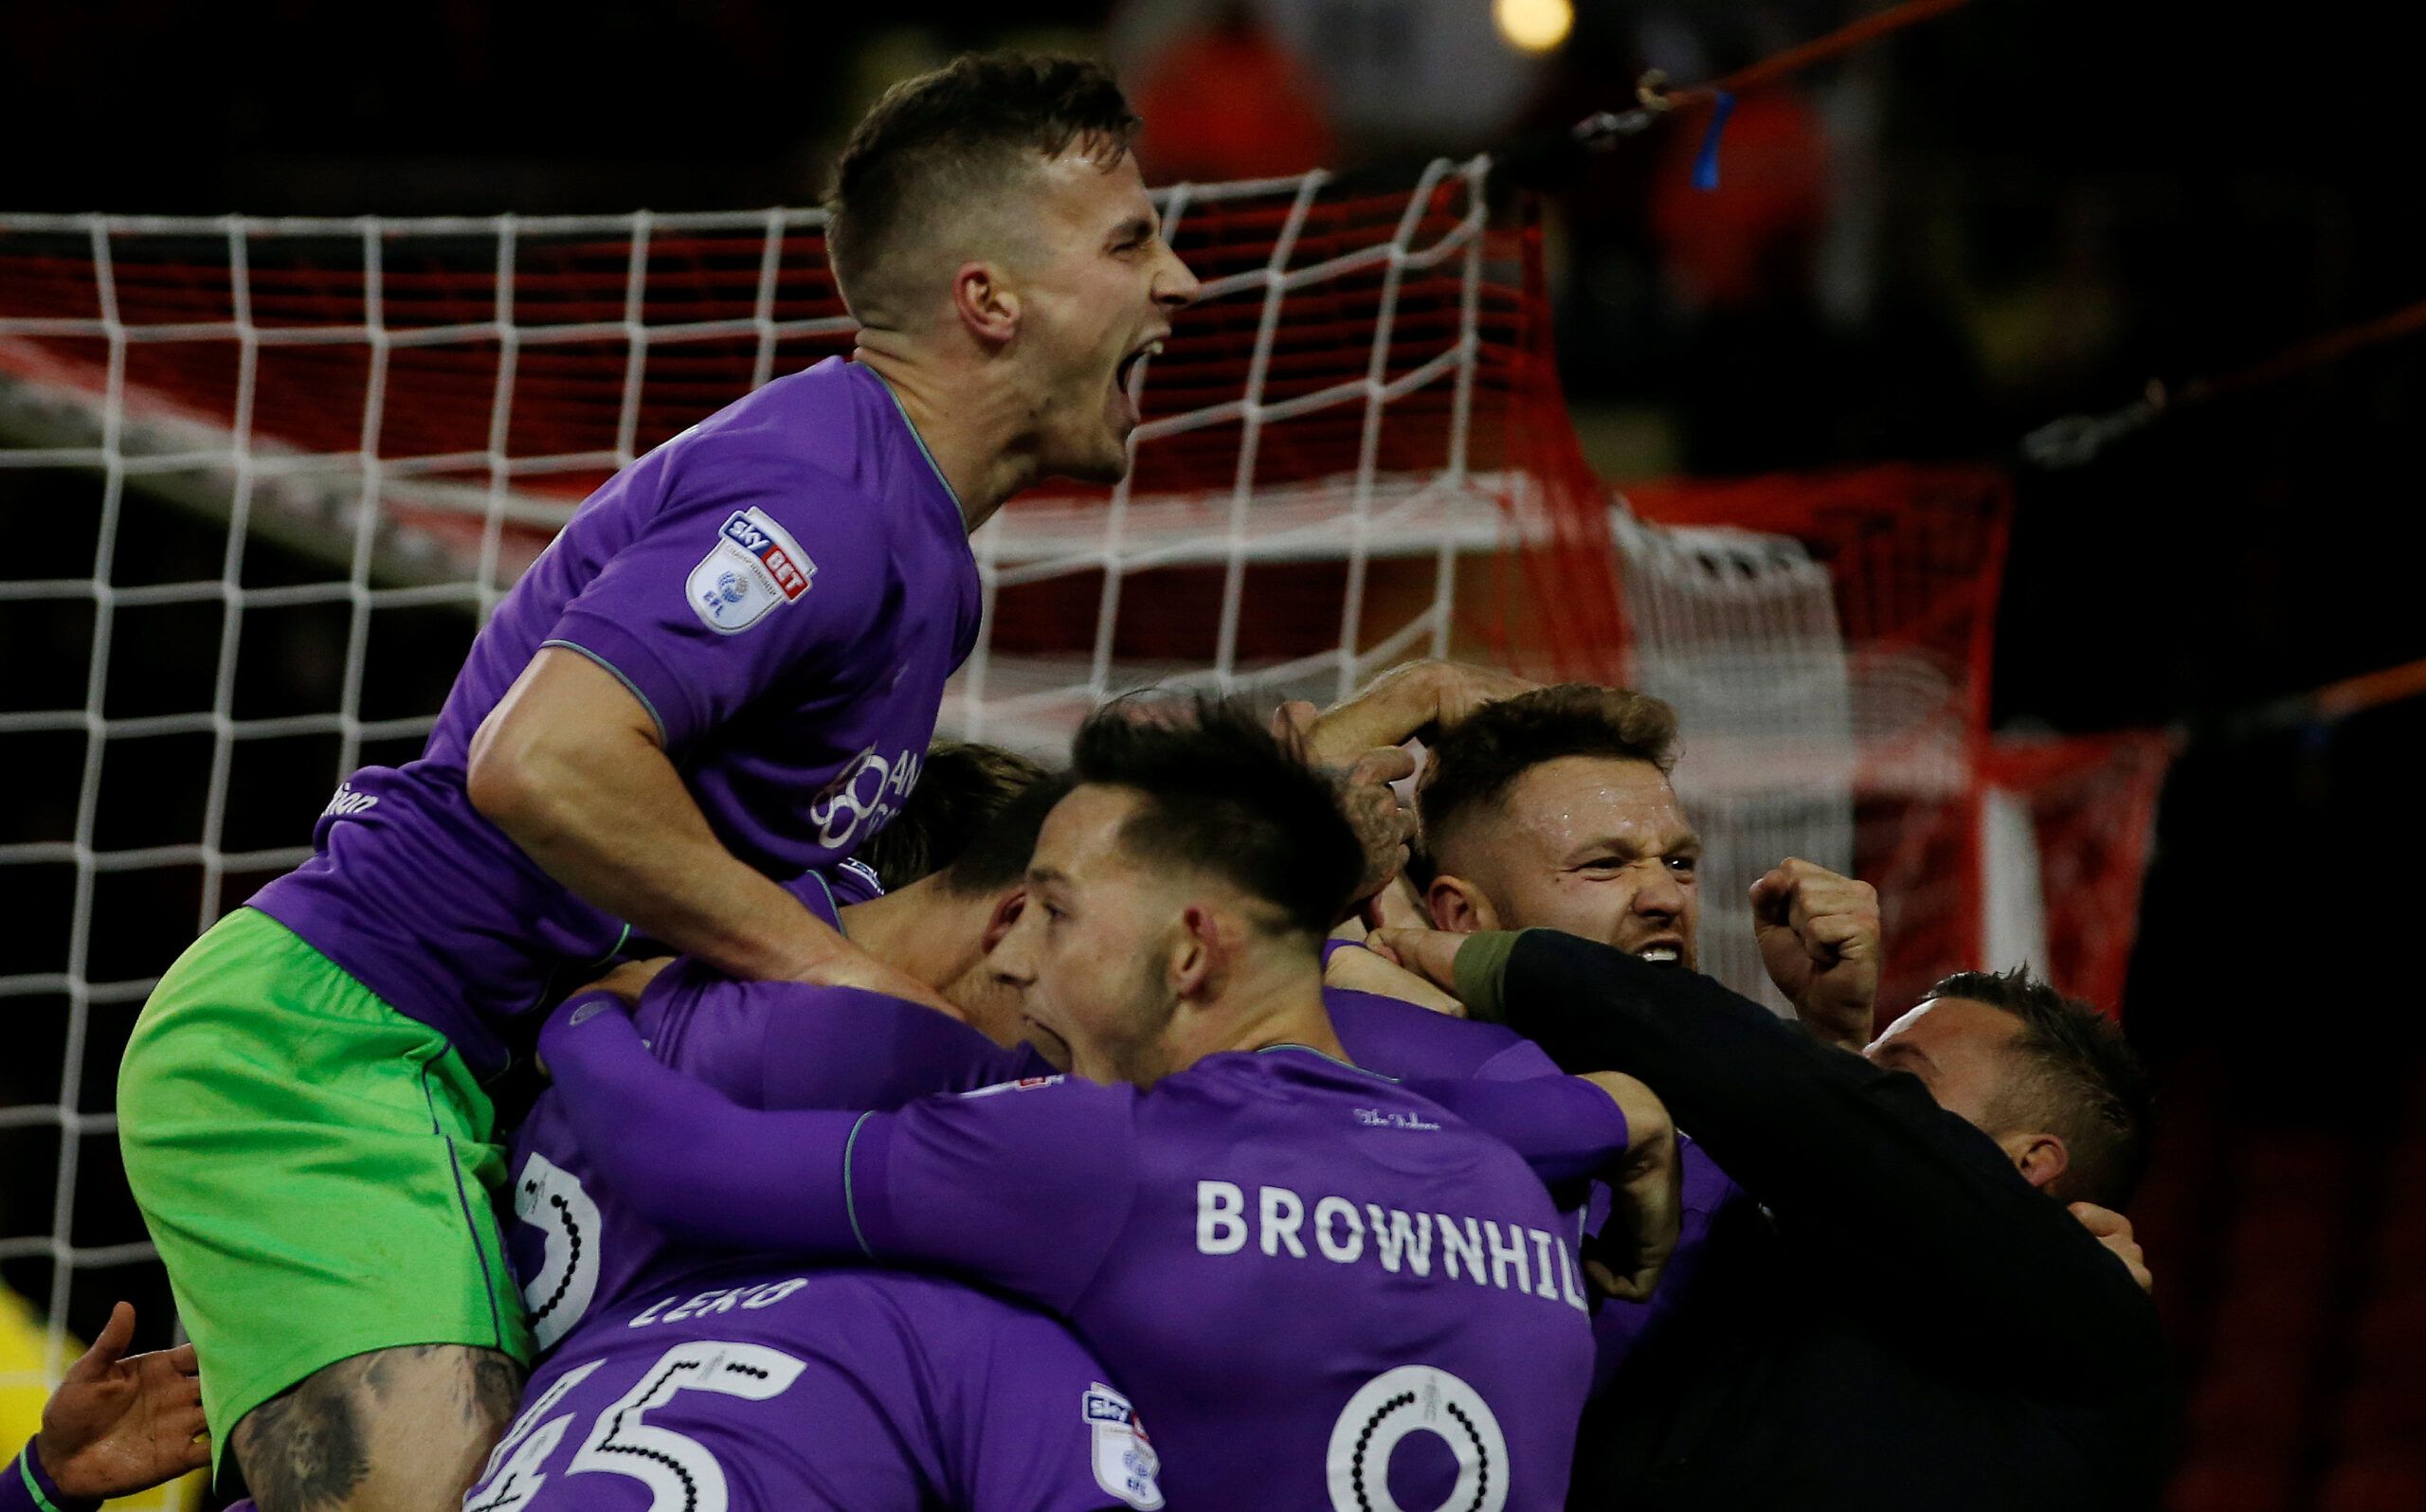 Soccer Football - Championship - Sheffield United vs Bristol City - Bramall Lane, Sheffield, Britain - December 8, 2017   Bristol City's Aden Flint (hidden) celebrates scoring their second goal with teammates   Action Images/Craig Brough    EDITORIAL USE ONLY. No use with unauthorized audio, video, data, fixture lists, club/league logos or 